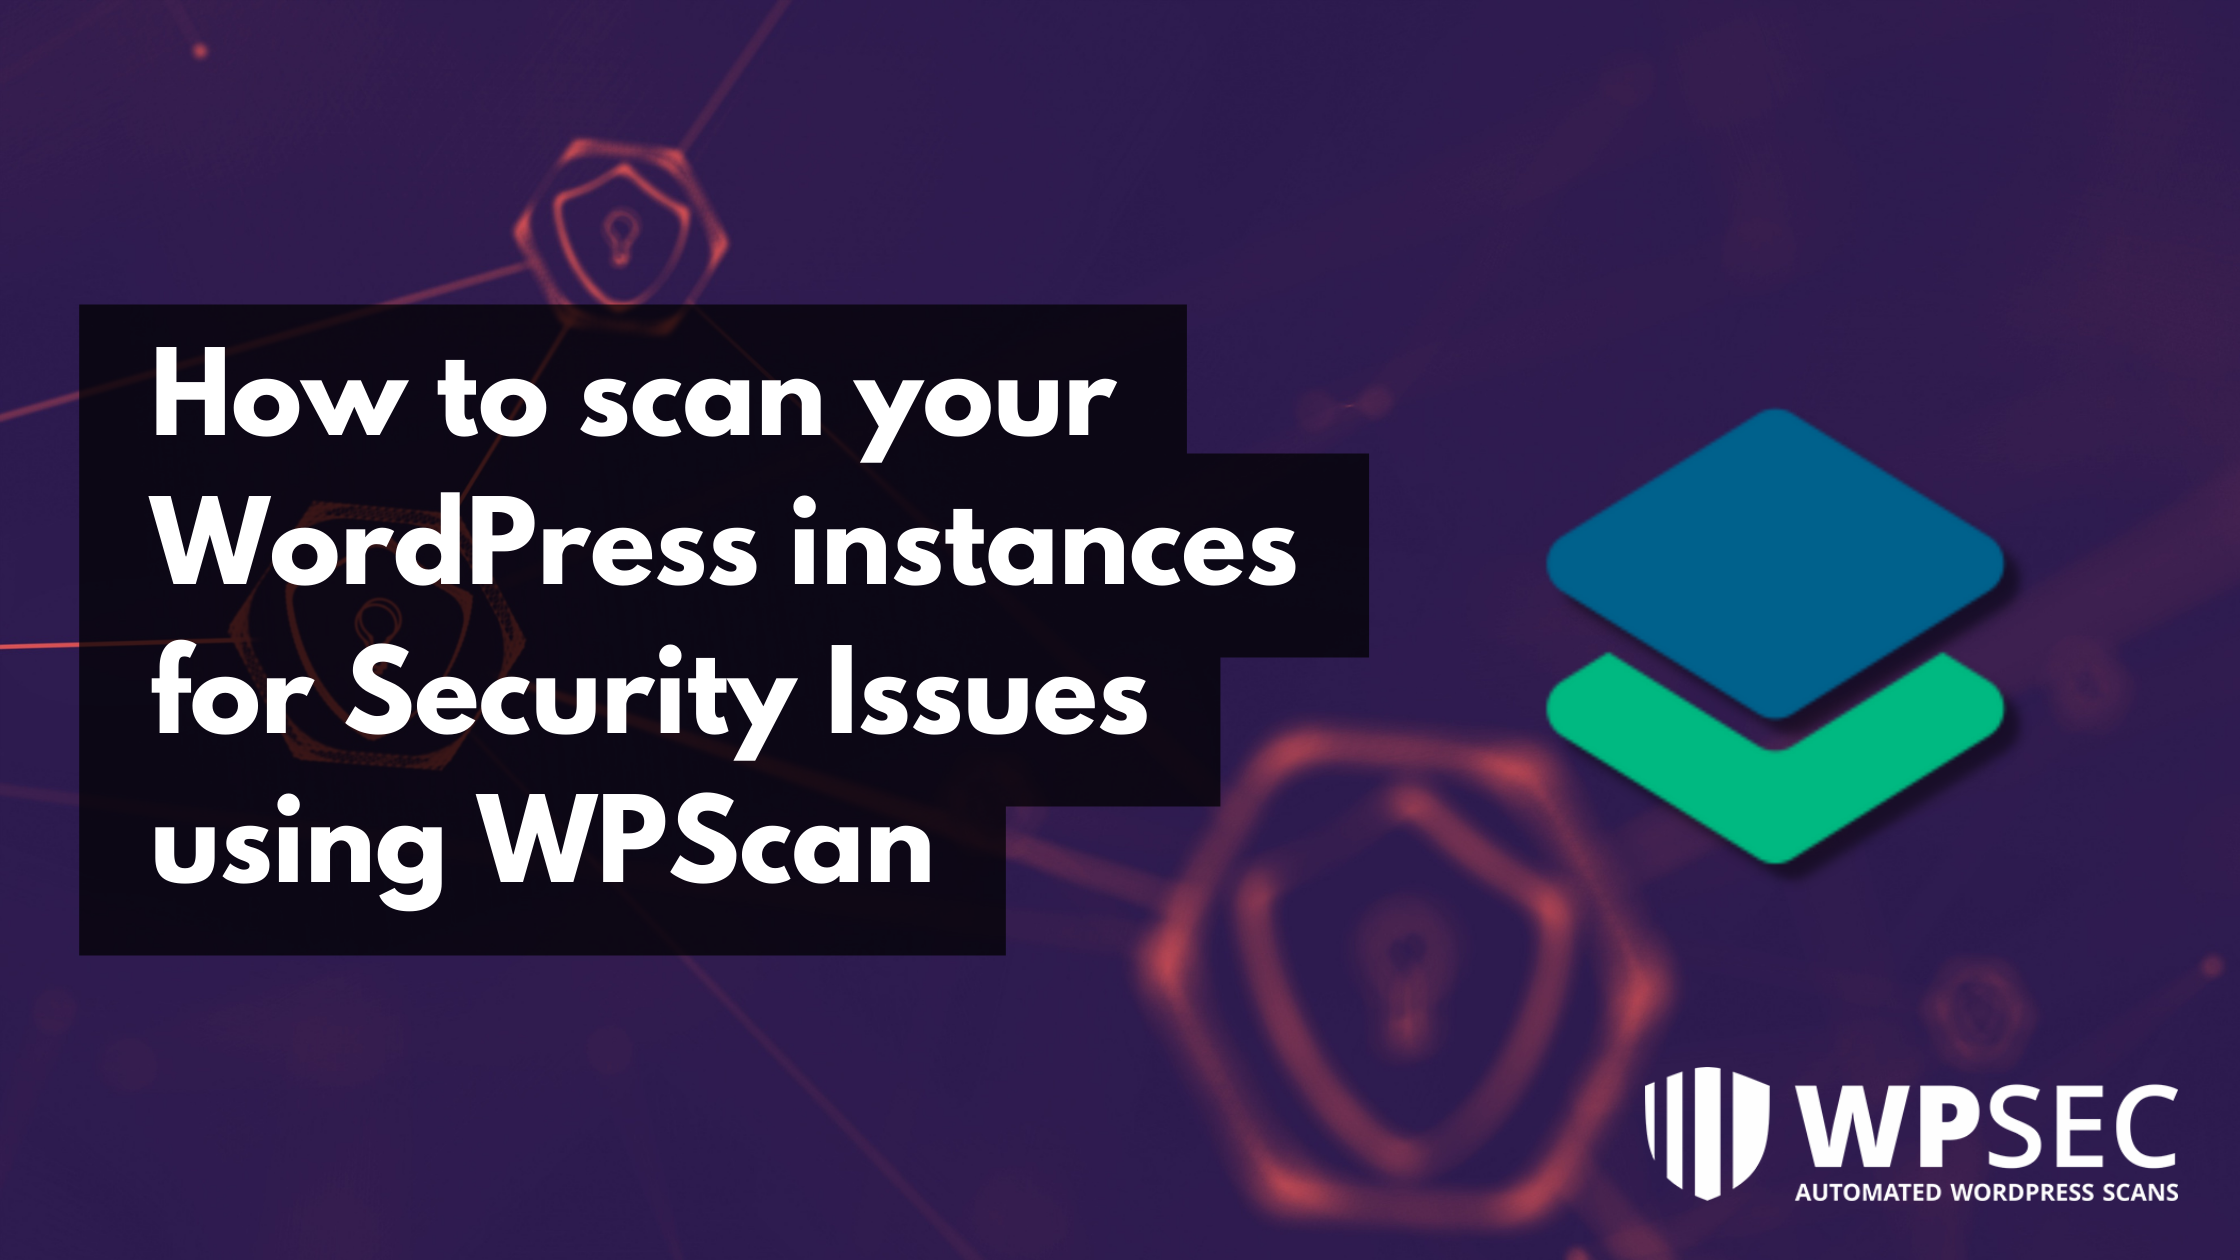 How to scan your WordPress instances for Security Issues using WPScan